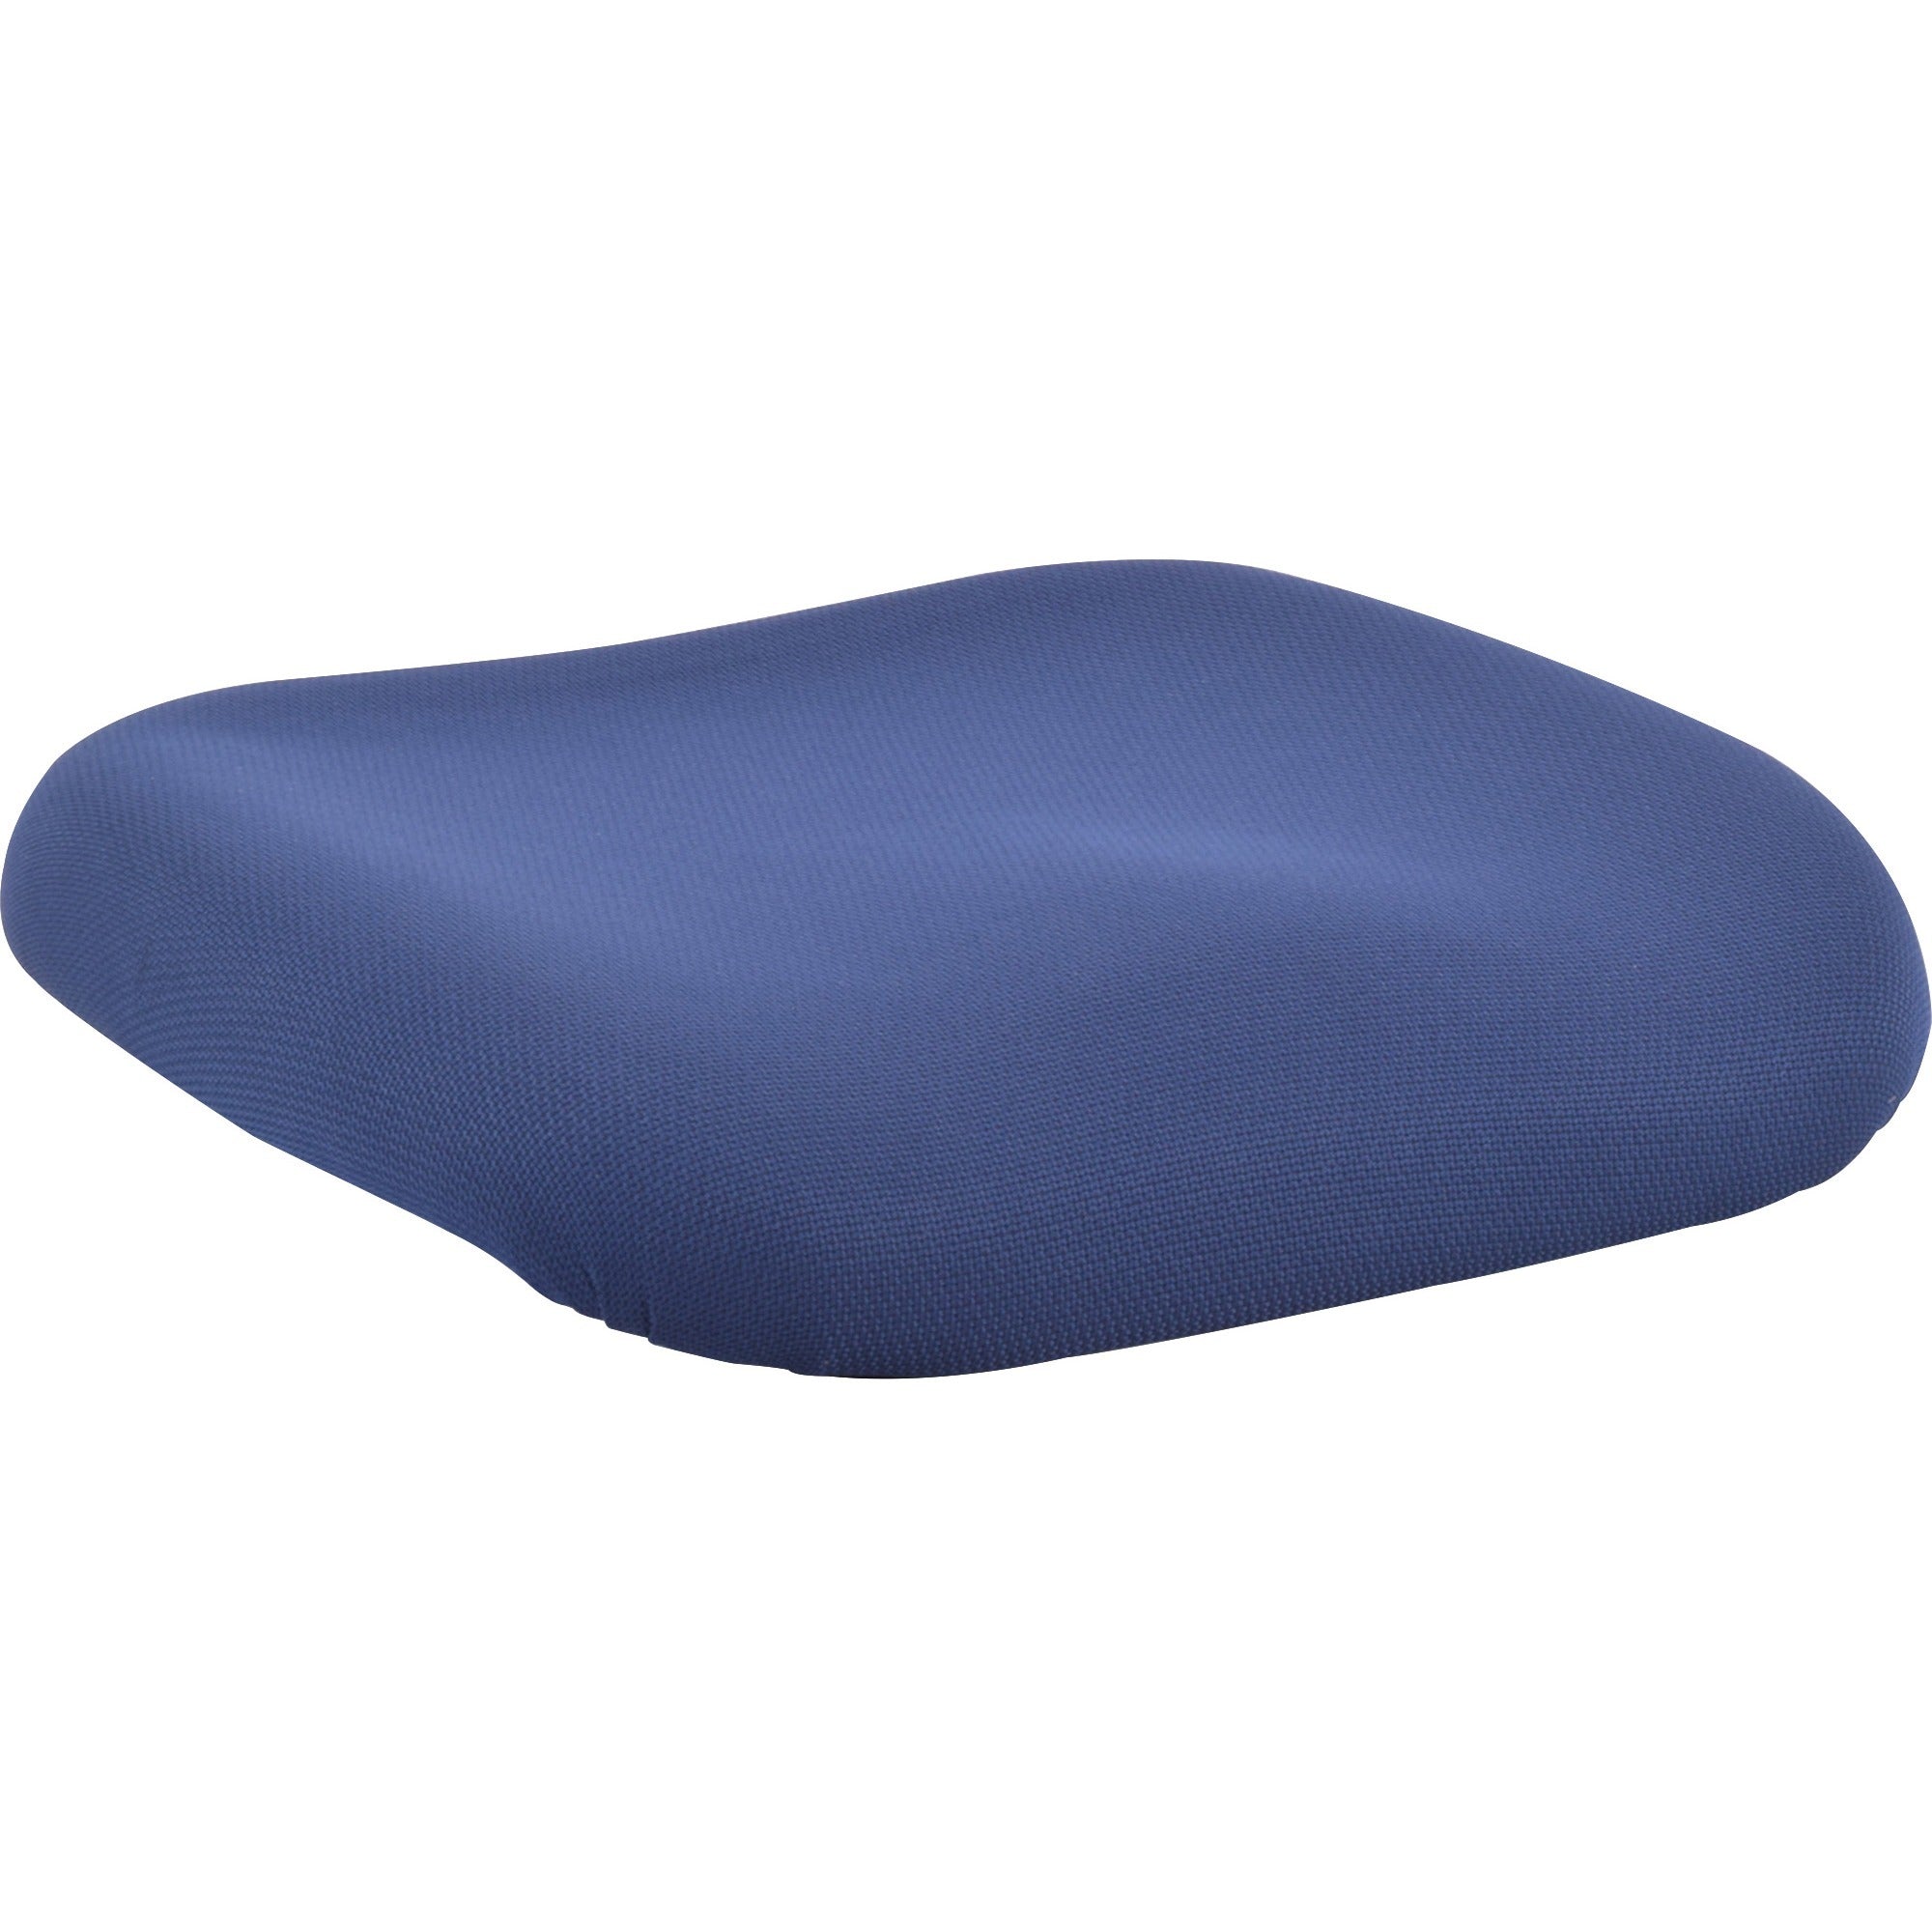 lorell-premium-molded-tractor-seat-for-ergomesh-frame-navy-fabric-1-each_llr86216 - 1